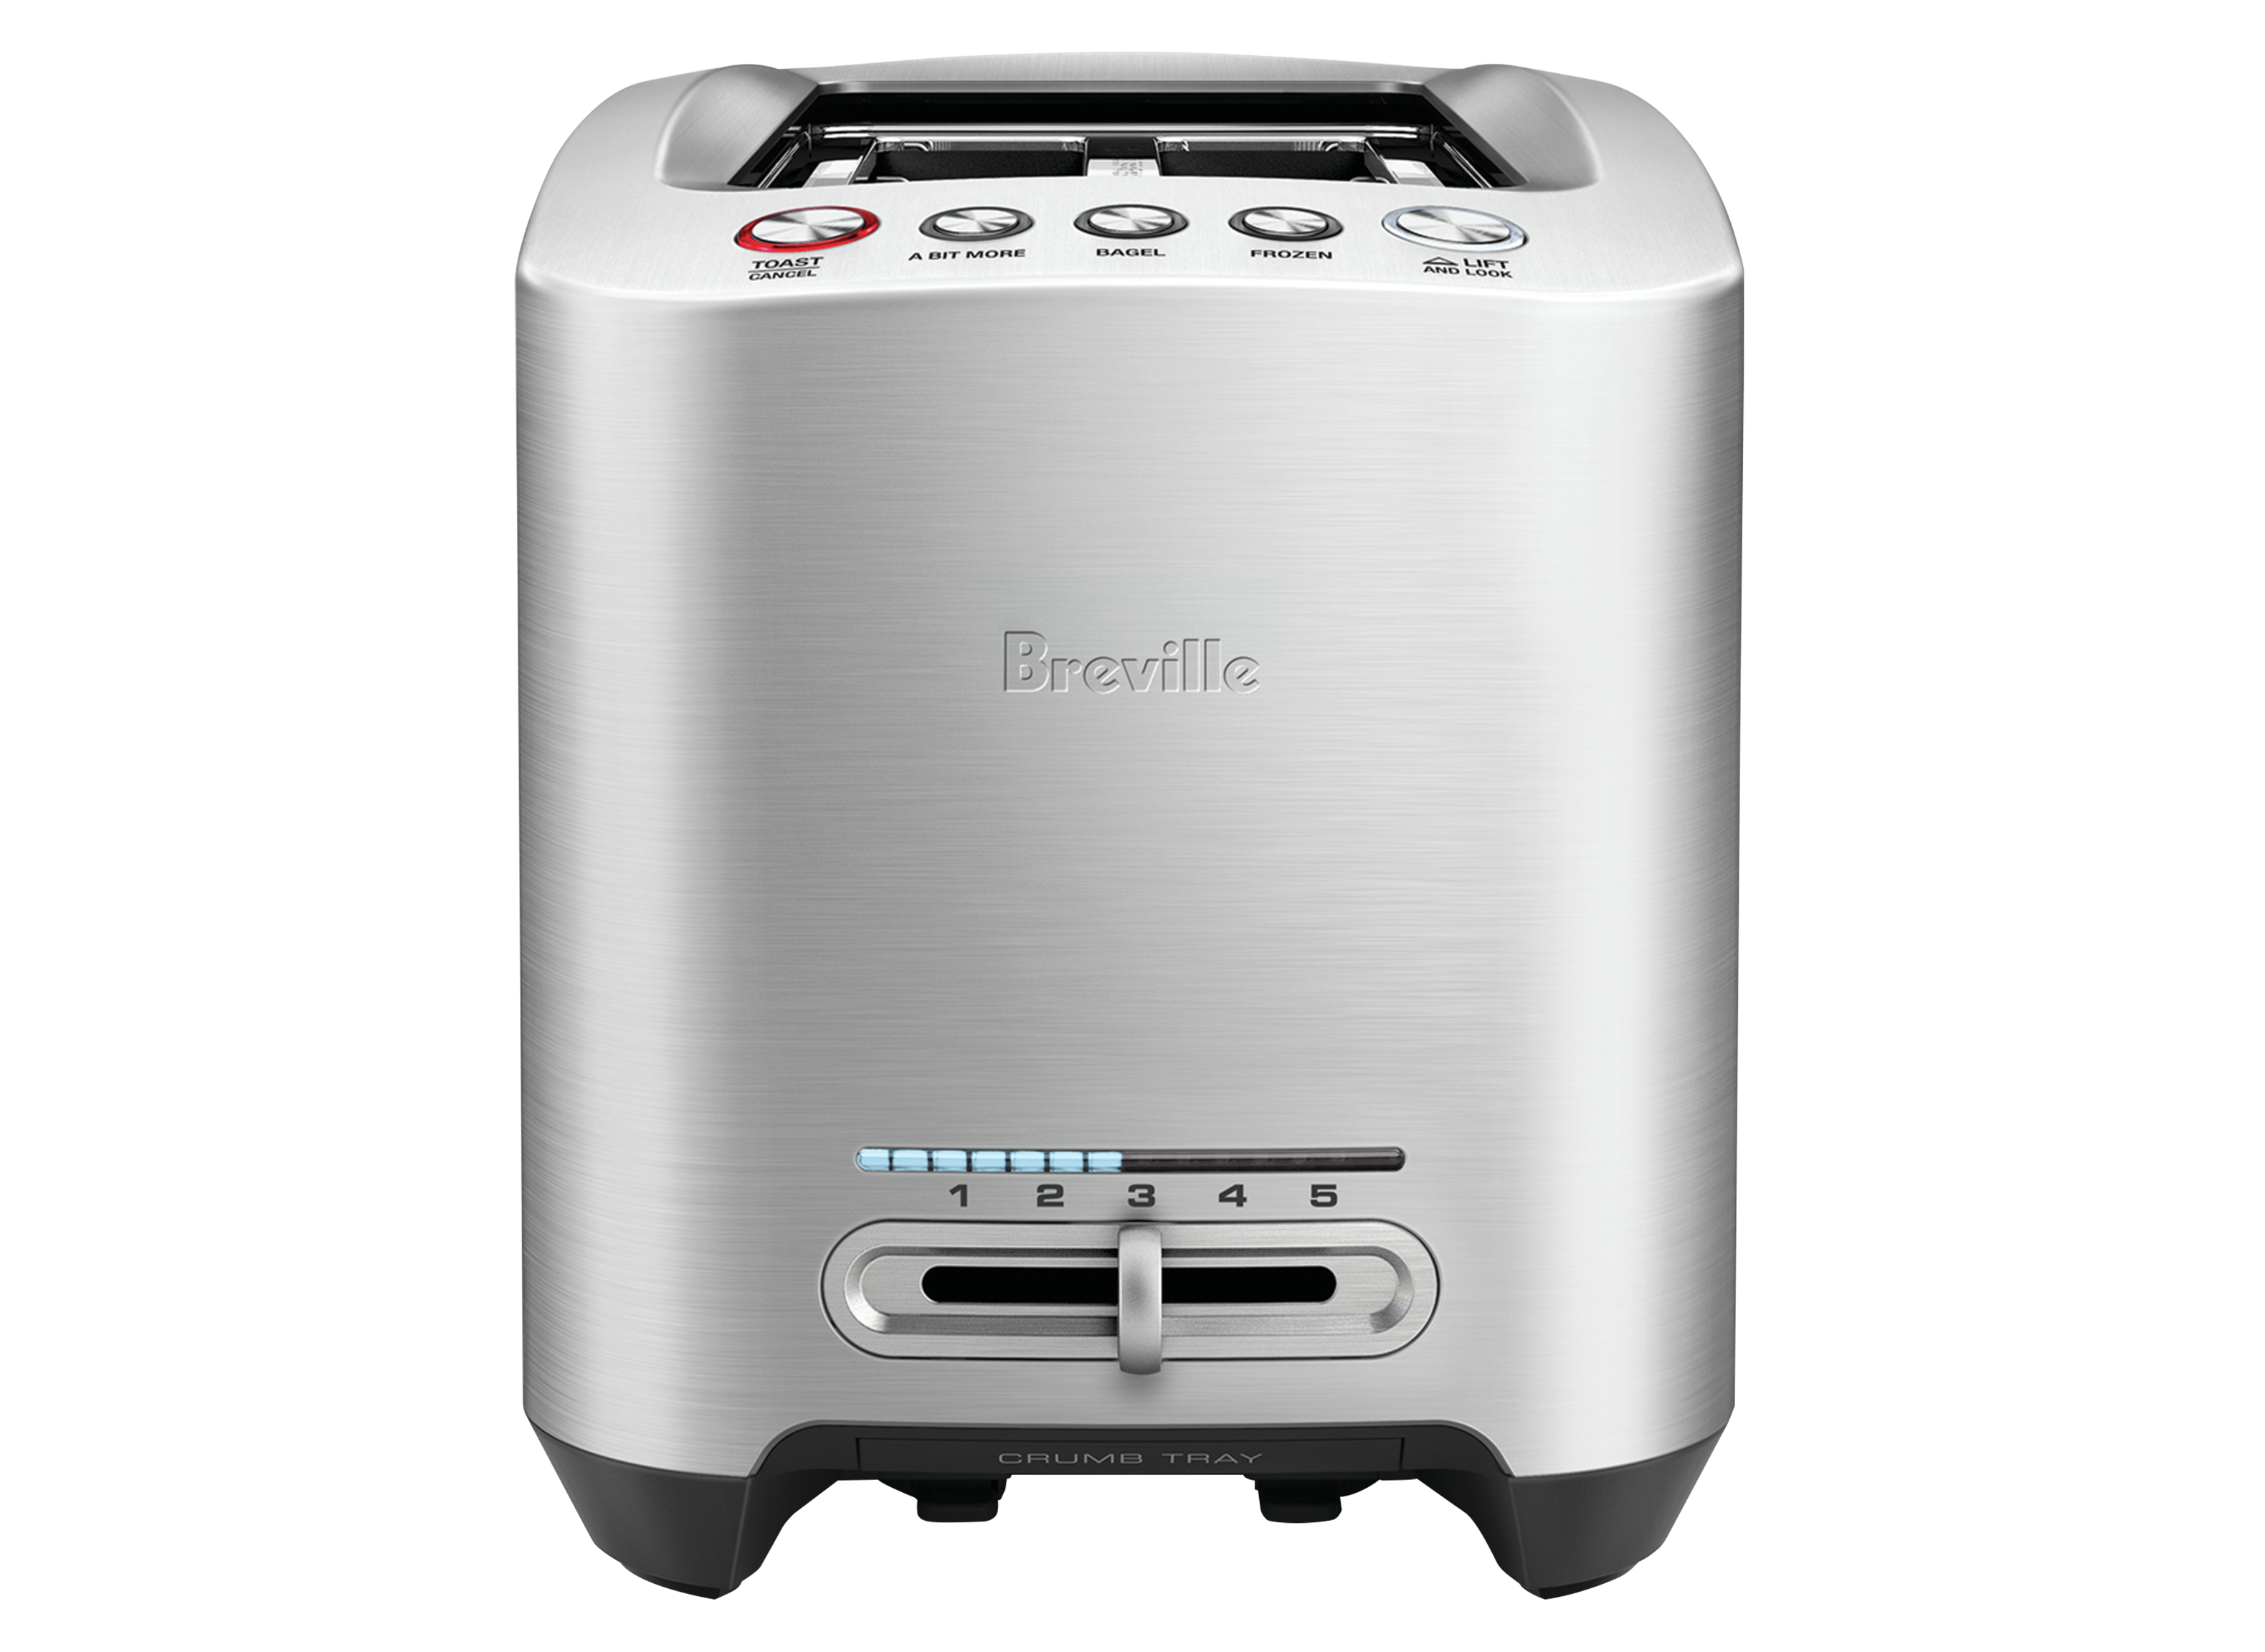 https://crdms.images.consumerreports.org/prod/products/cr/models/404767-2-slice-toasters-breville-die-cast-smart-toaster-bta830xl-10023423.png